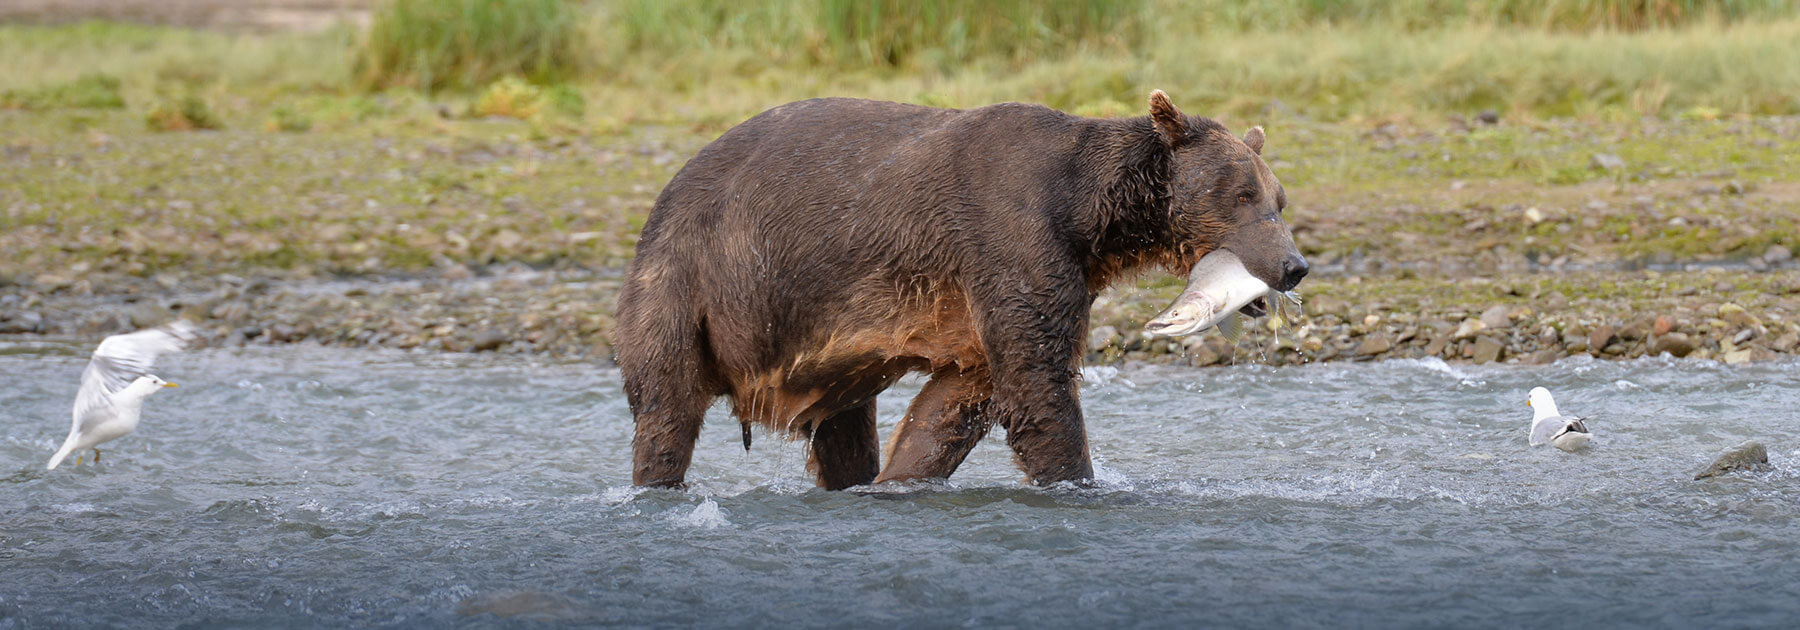 Brown Bear with Salmon in his mouth.